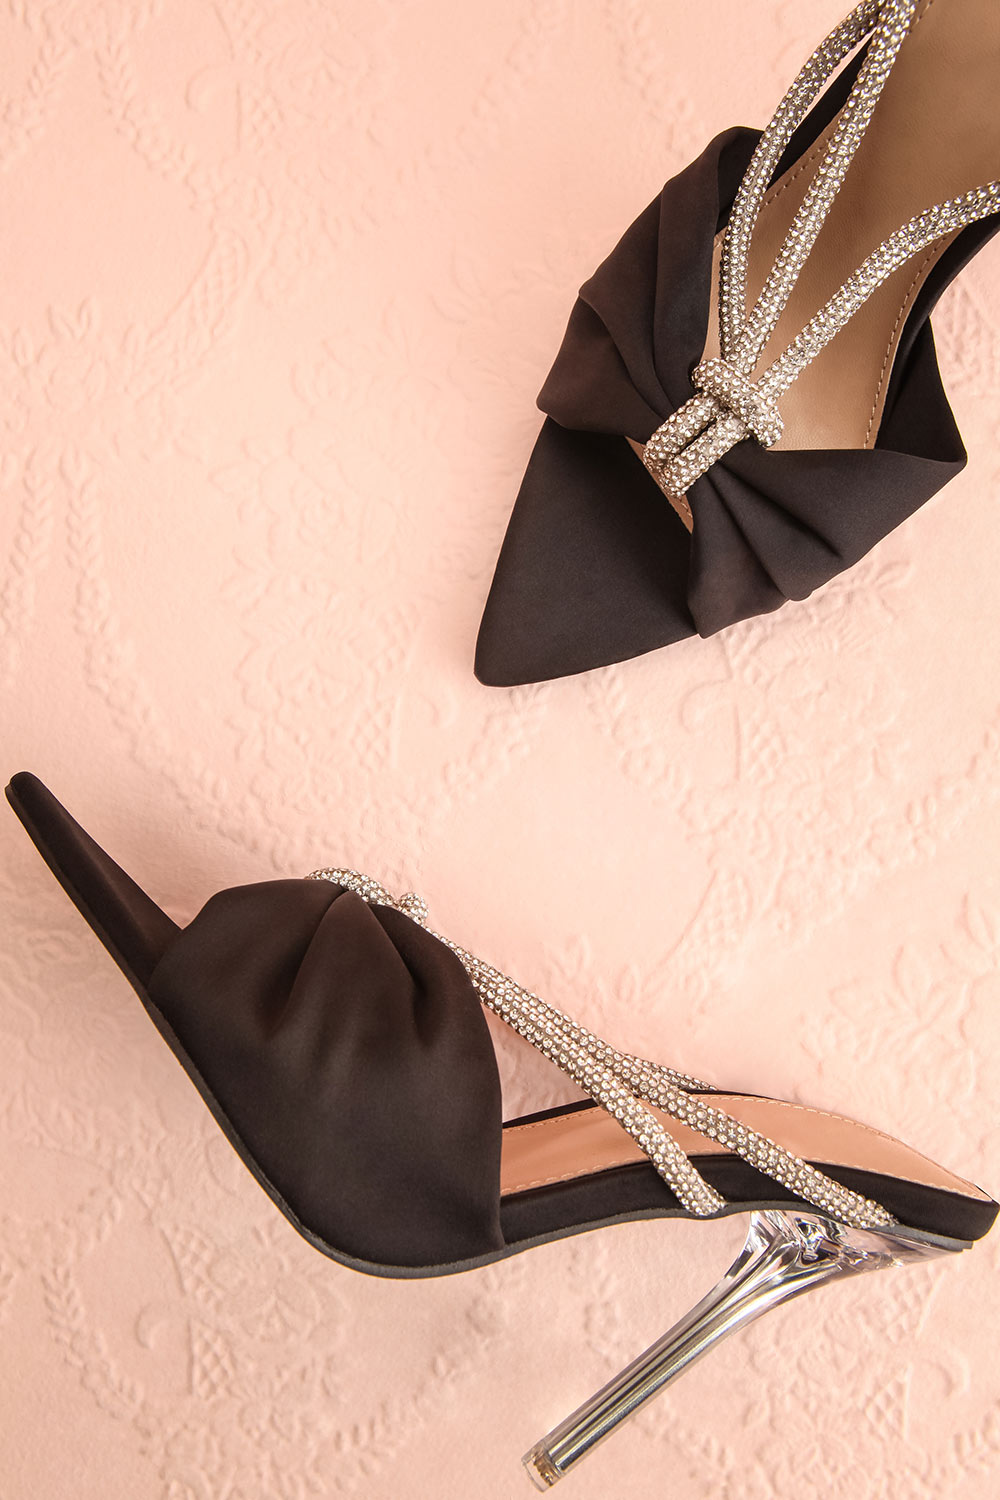 Chamaeleon Black Pointed-Toe Heels w/ Sequin Knot | Boutique 1861 flat view